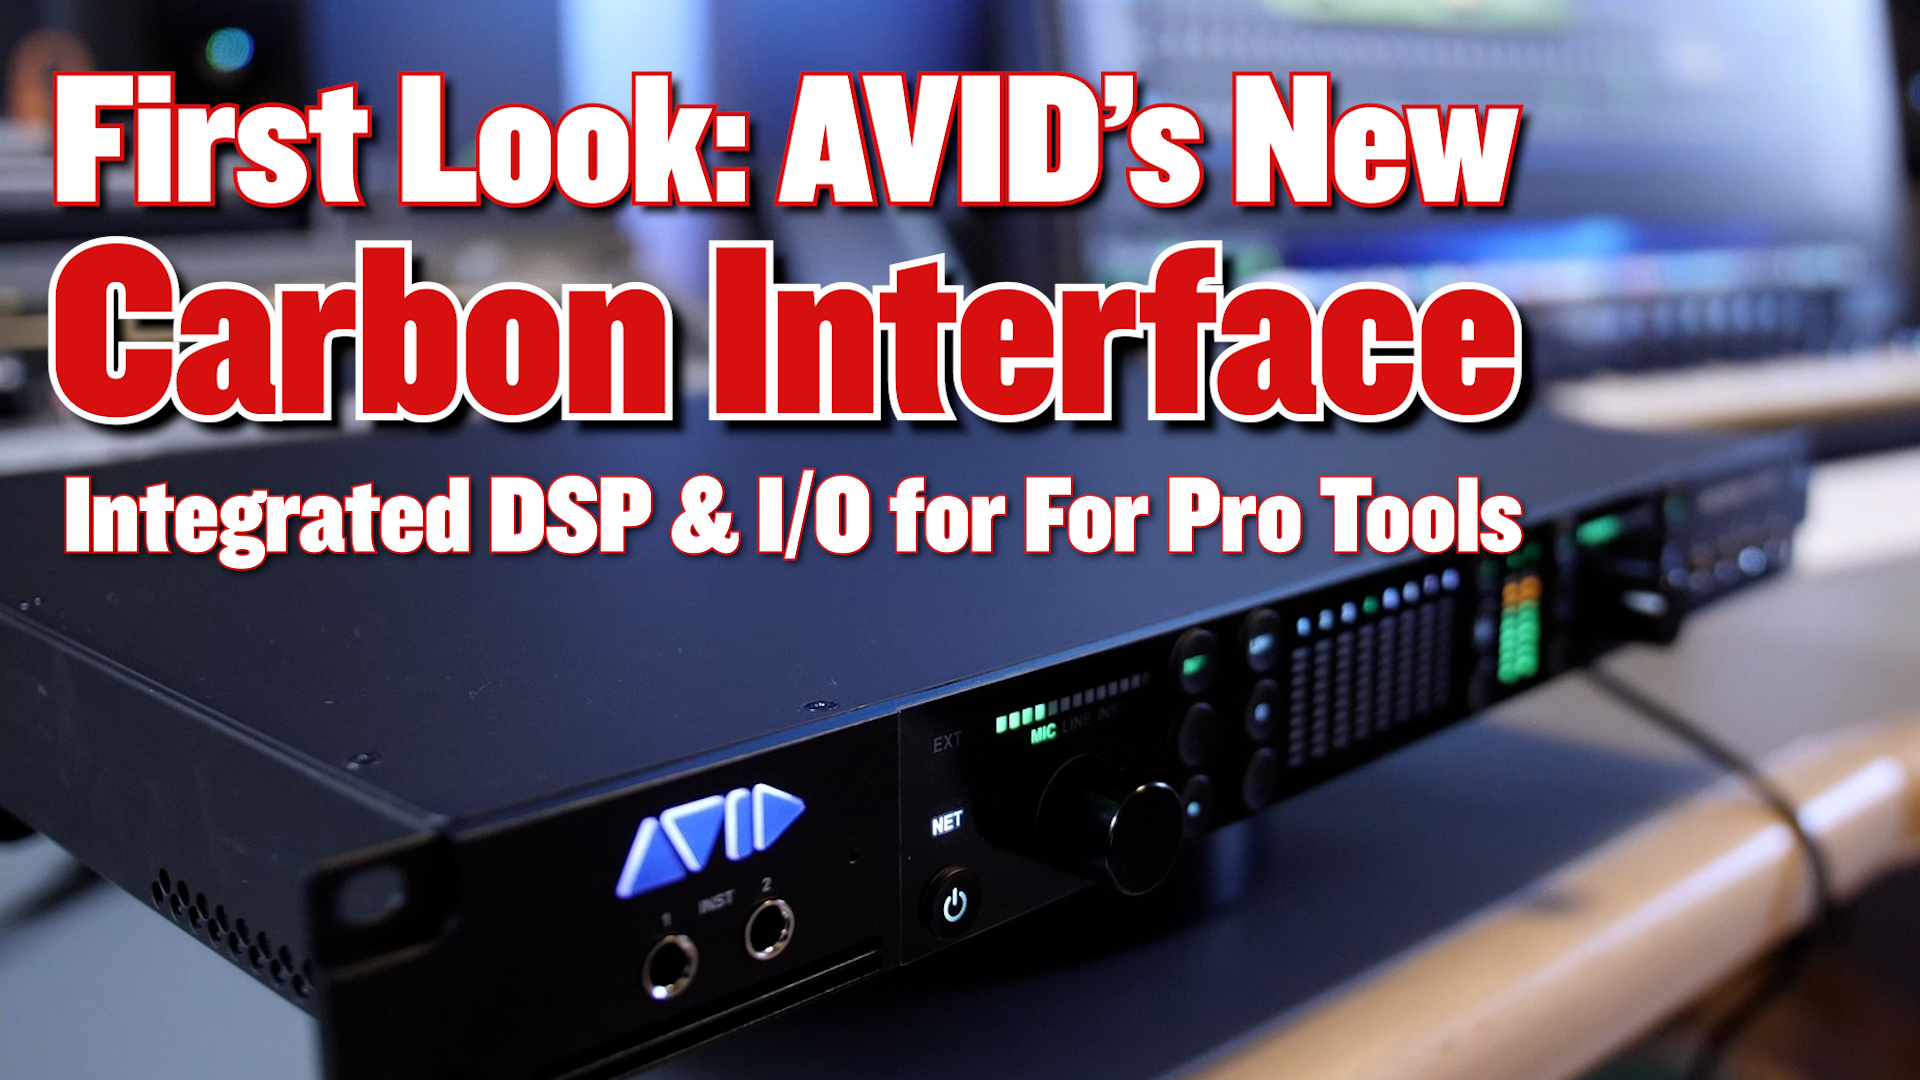 First Look: The Carbon Interface from AVID — Integrated DSP Power and I/O for Pro Tools and More